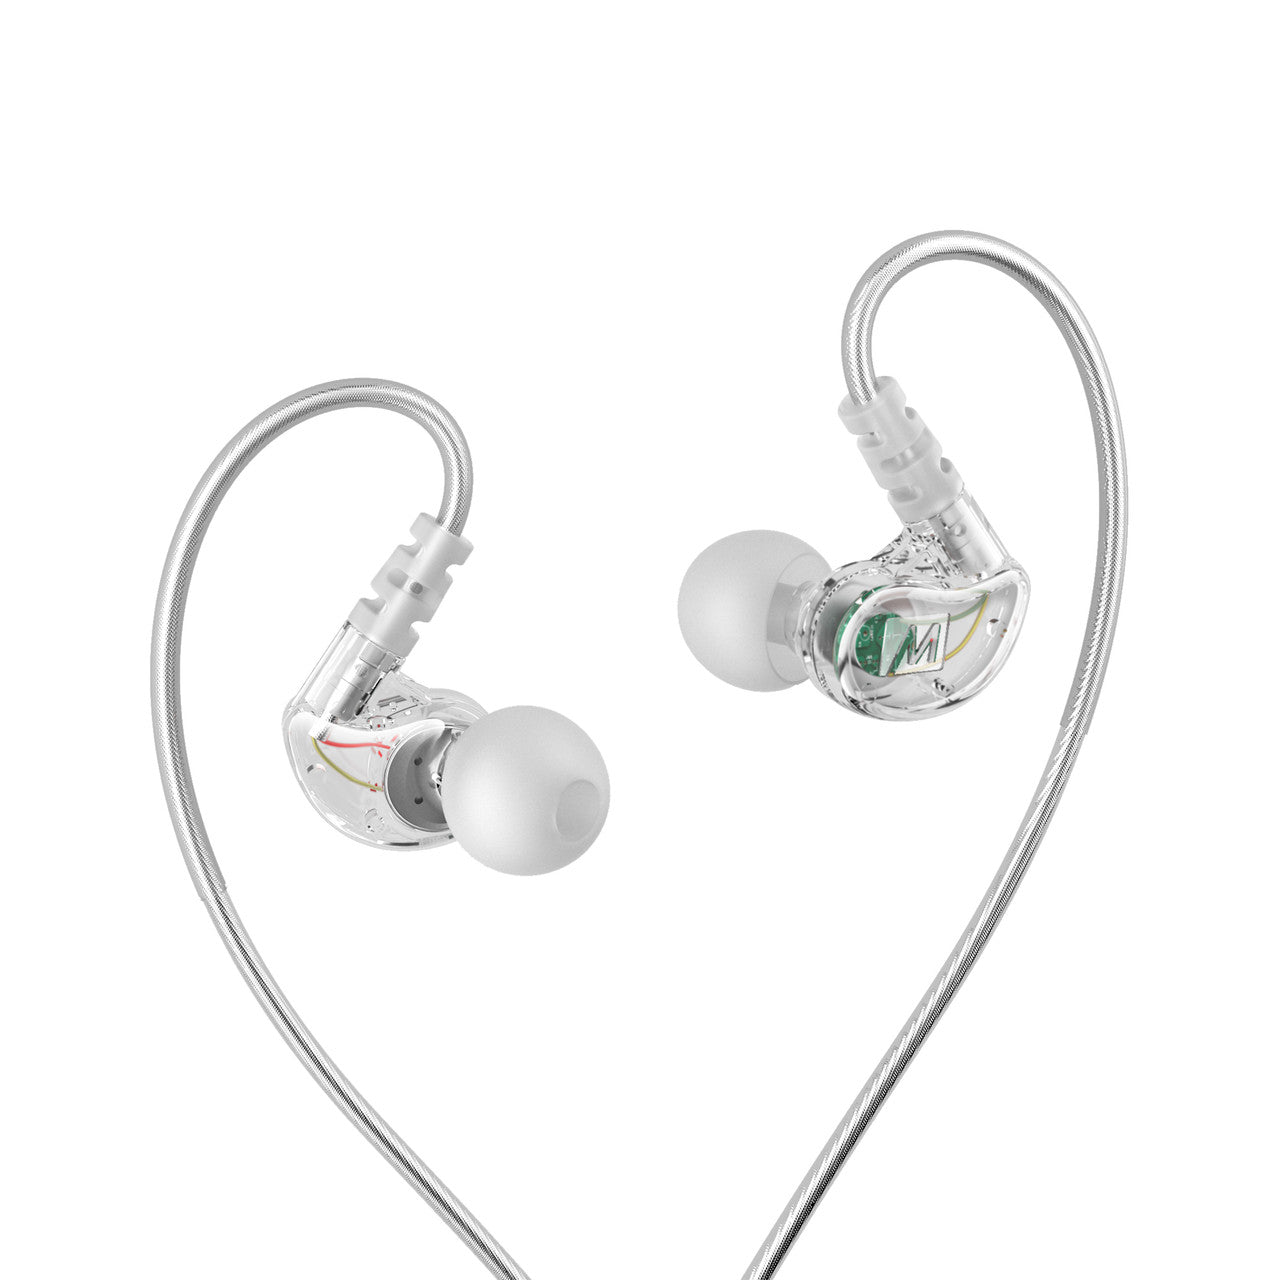 Image of M6 In-Ear Sports Headphones with Memory Wire (3.5mm Plug).